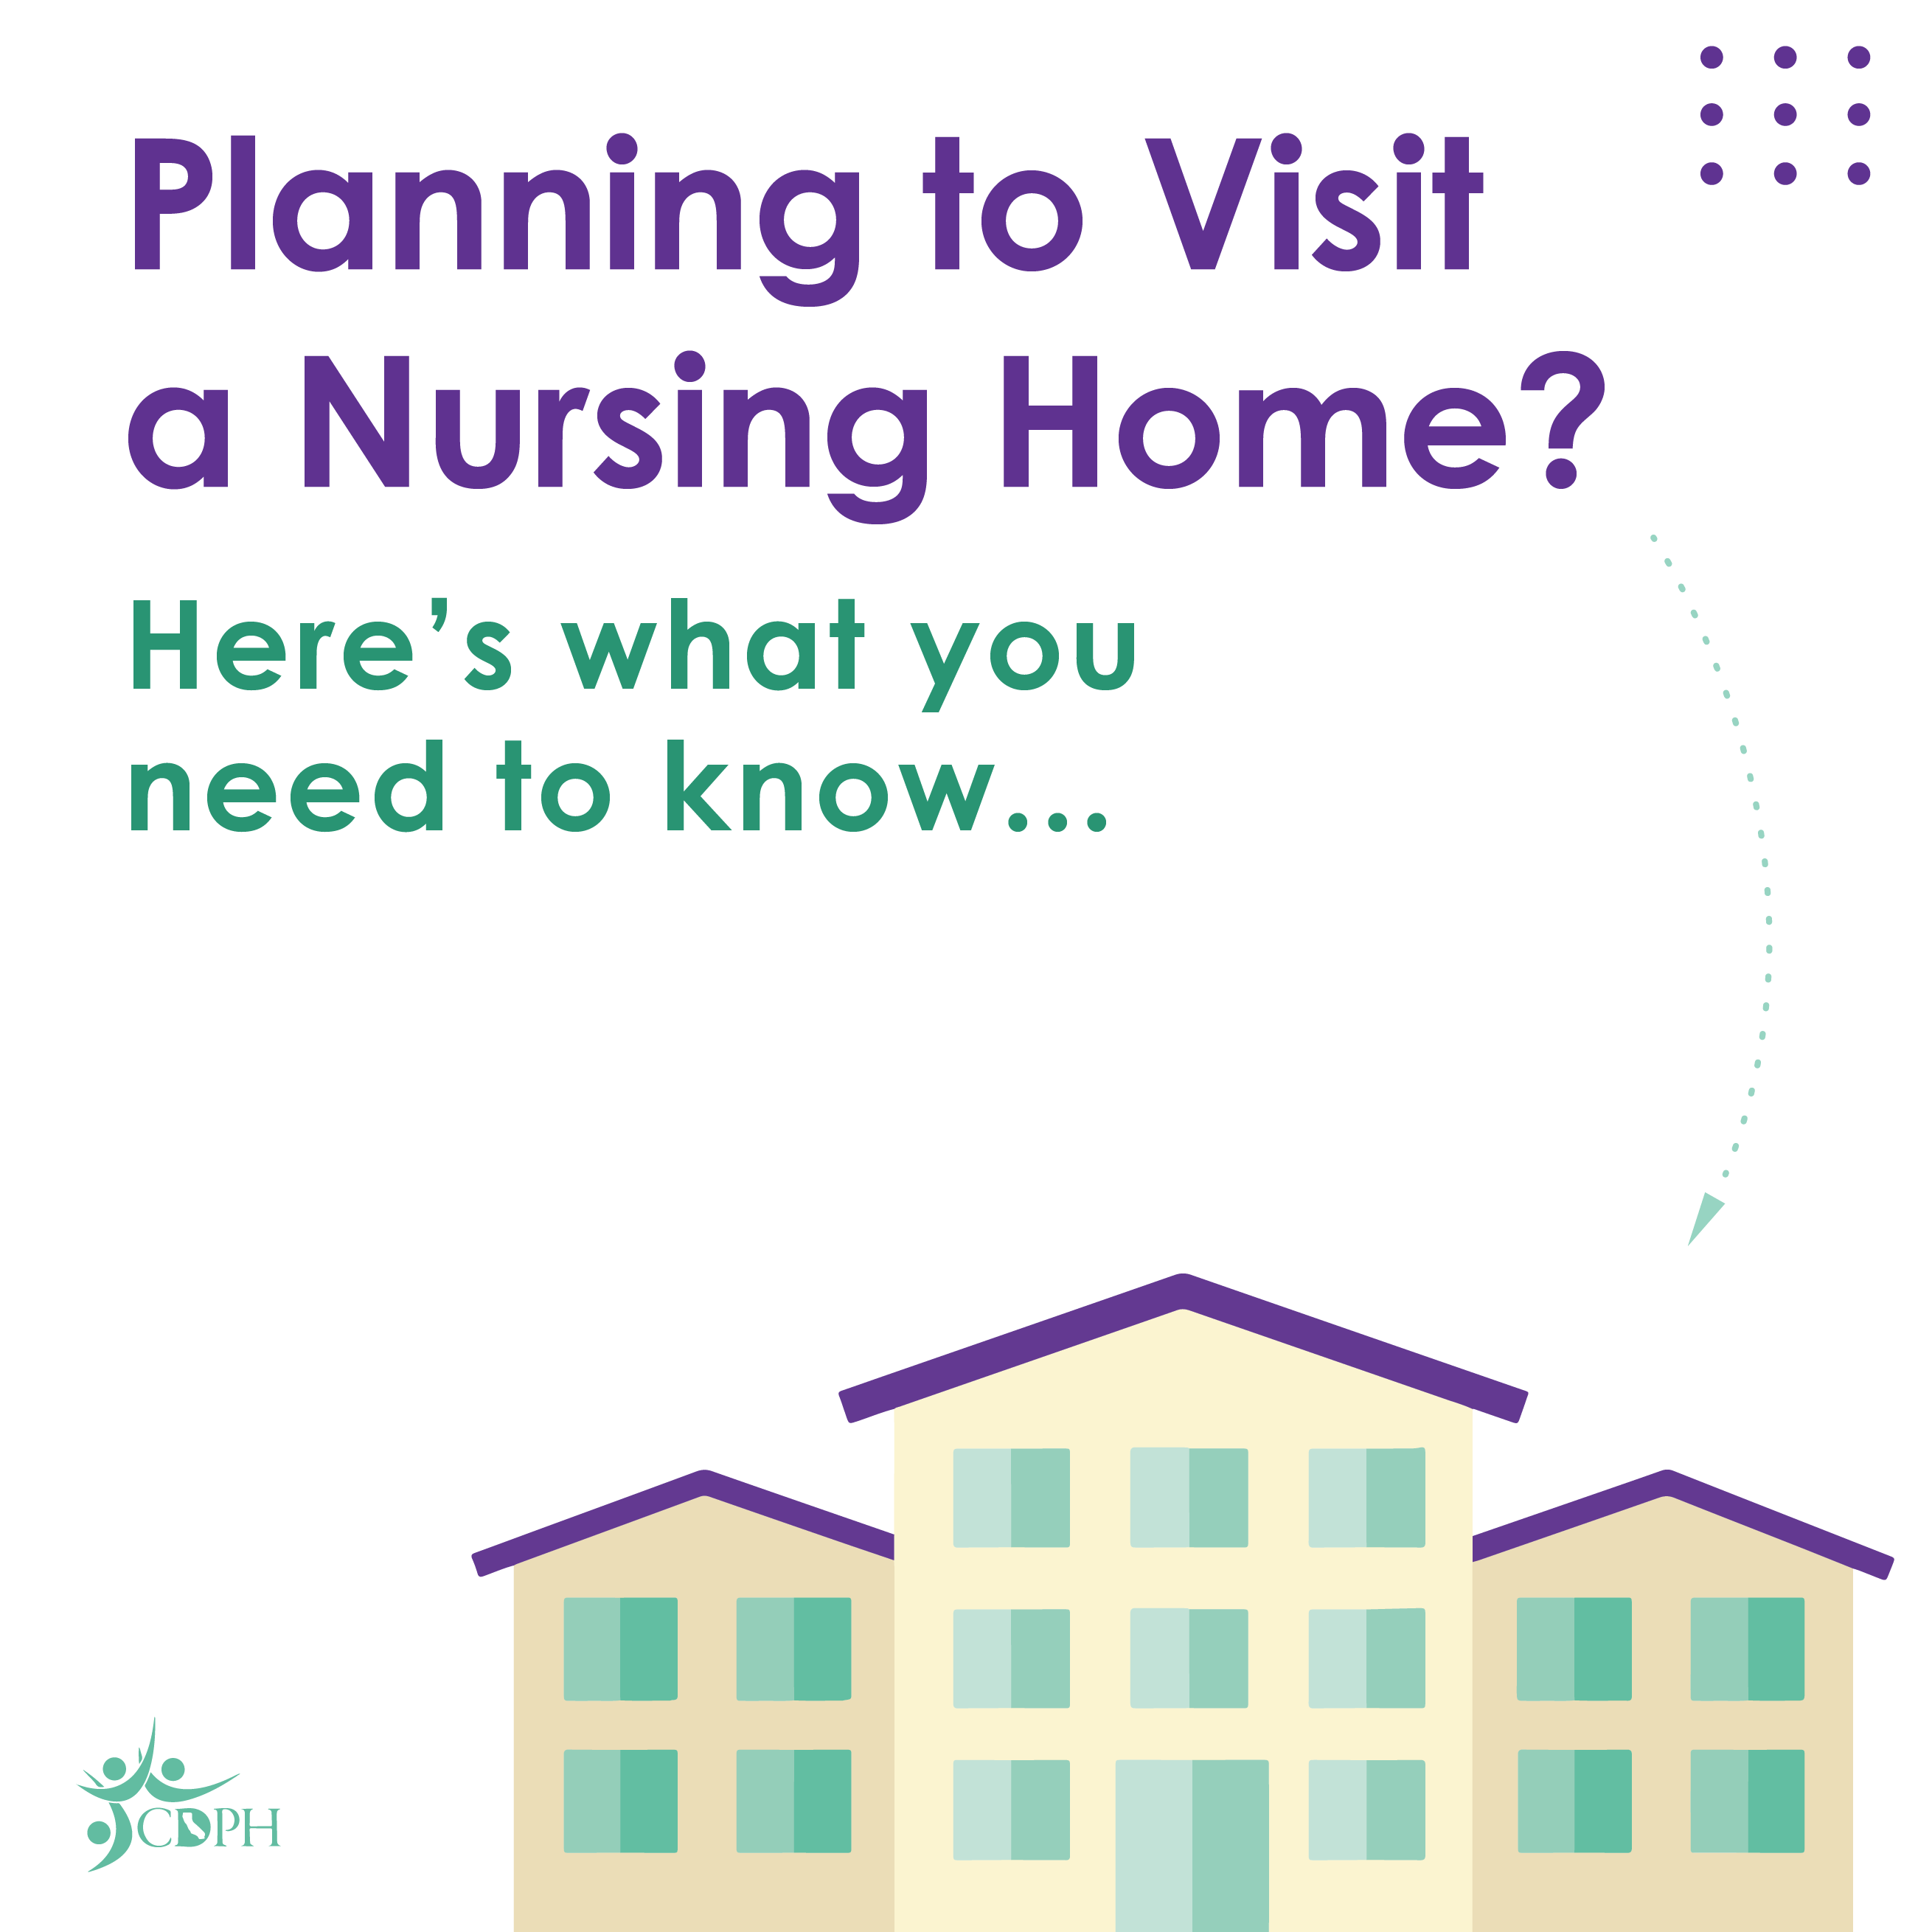 Planning to Visit a Nursing Home? Here's what you need to know...